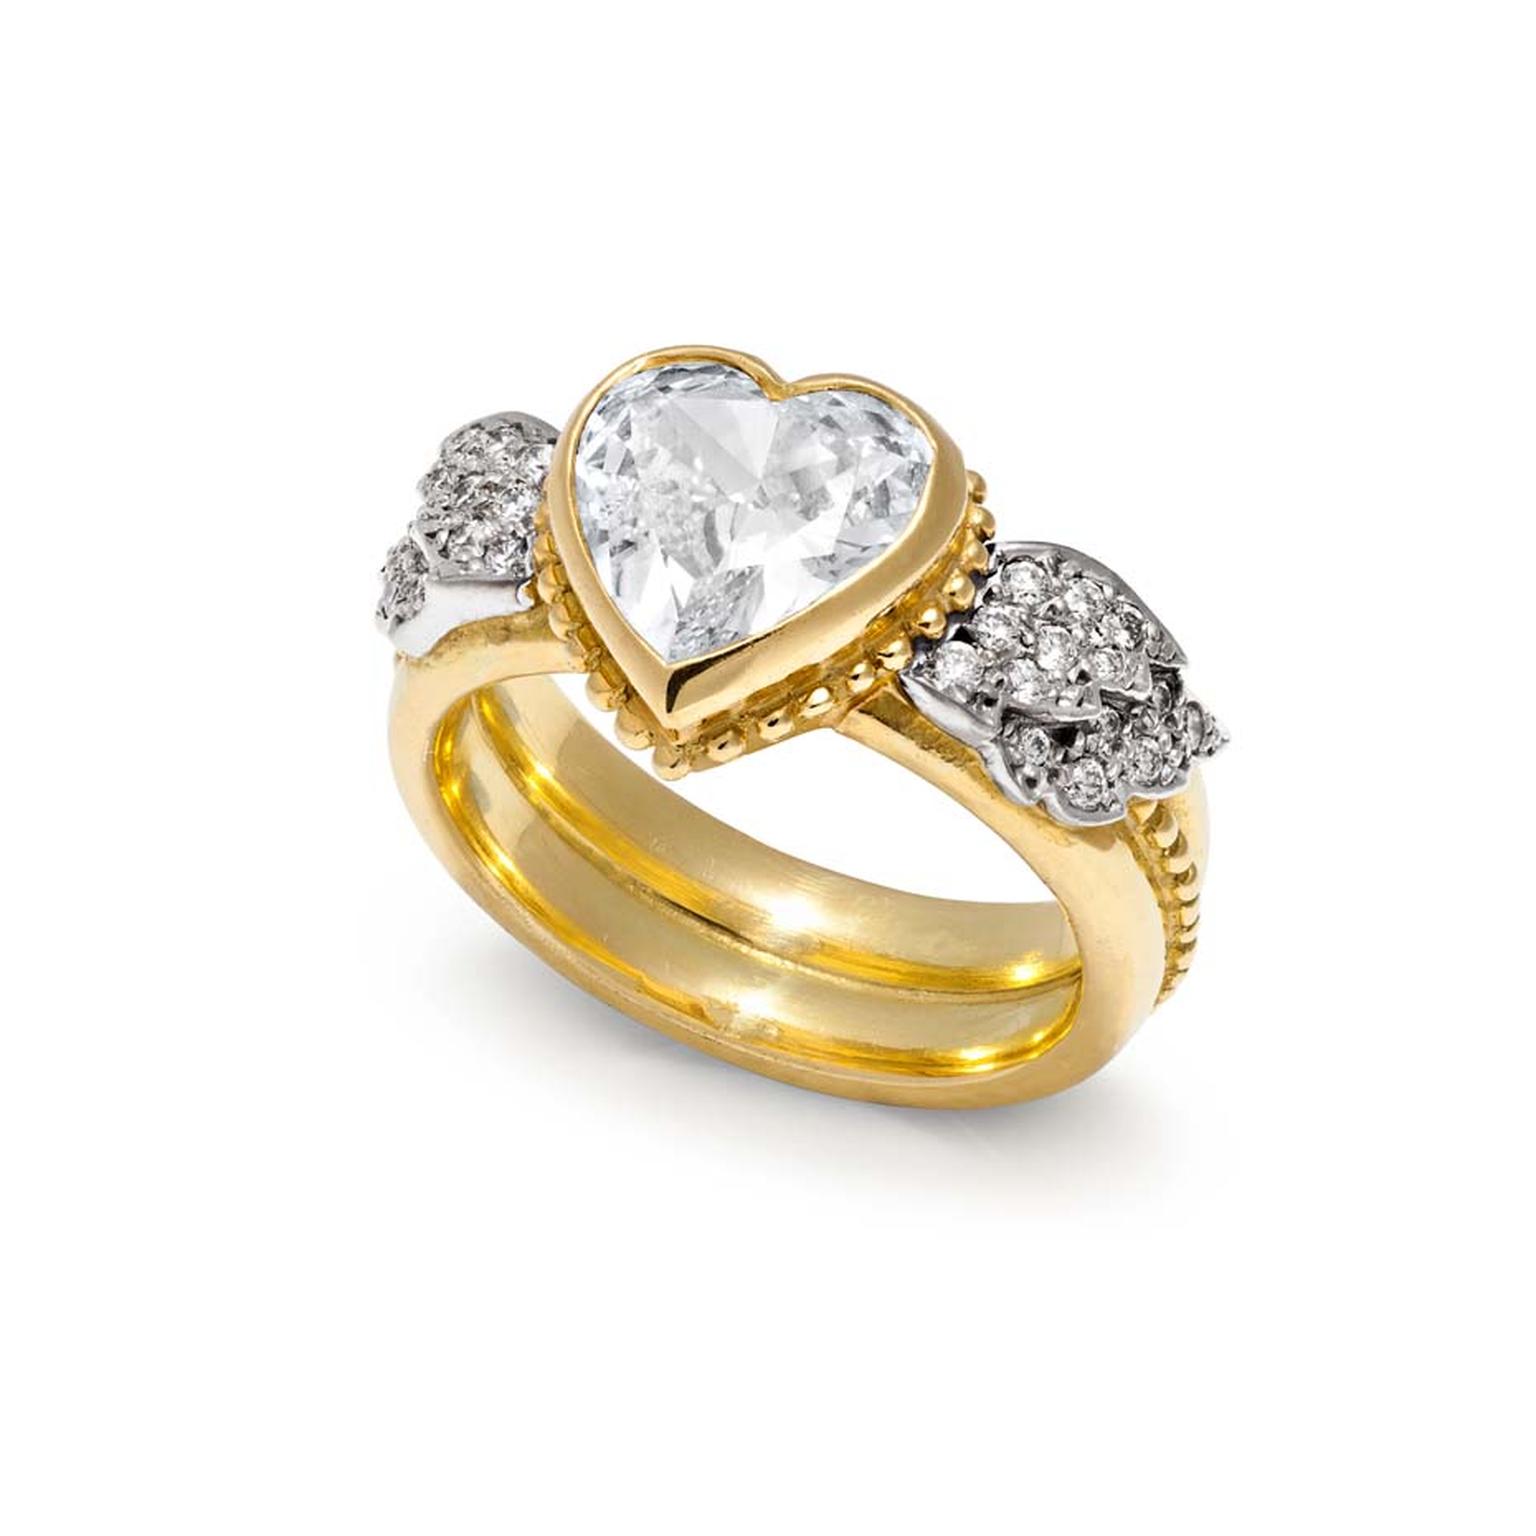 Heart engagement rings: not such a Bad Romance after all